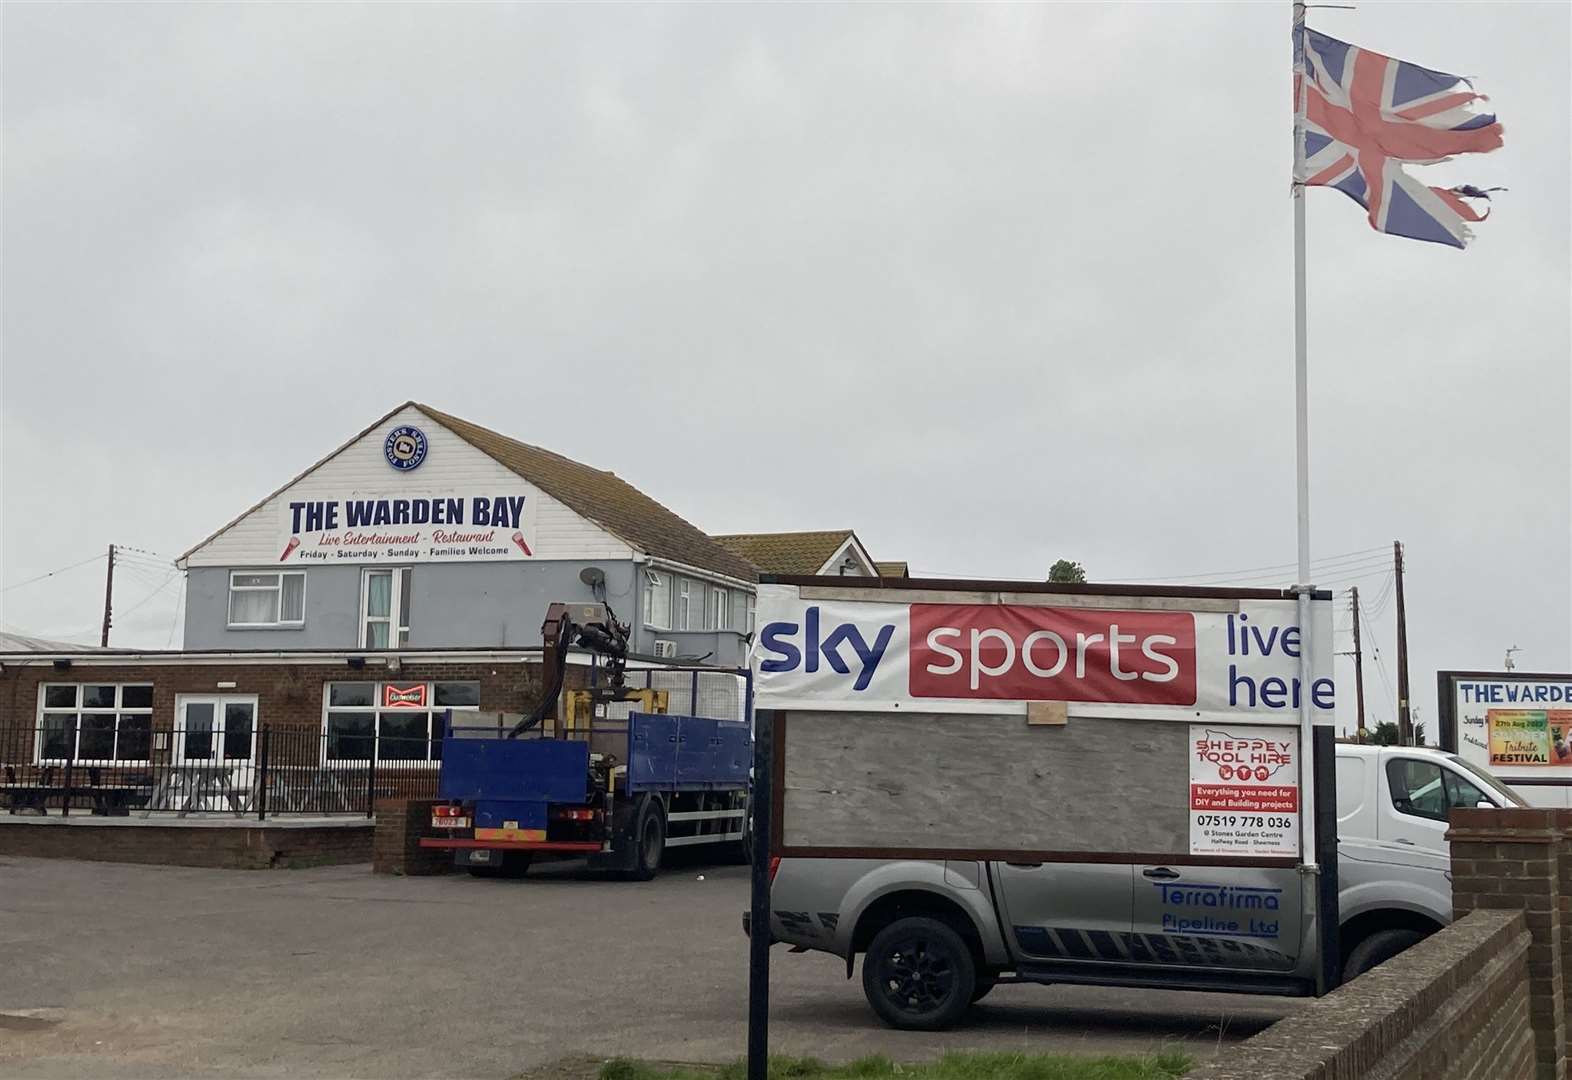 The Warden Bay pub in Leysdown almost lost its premises licence